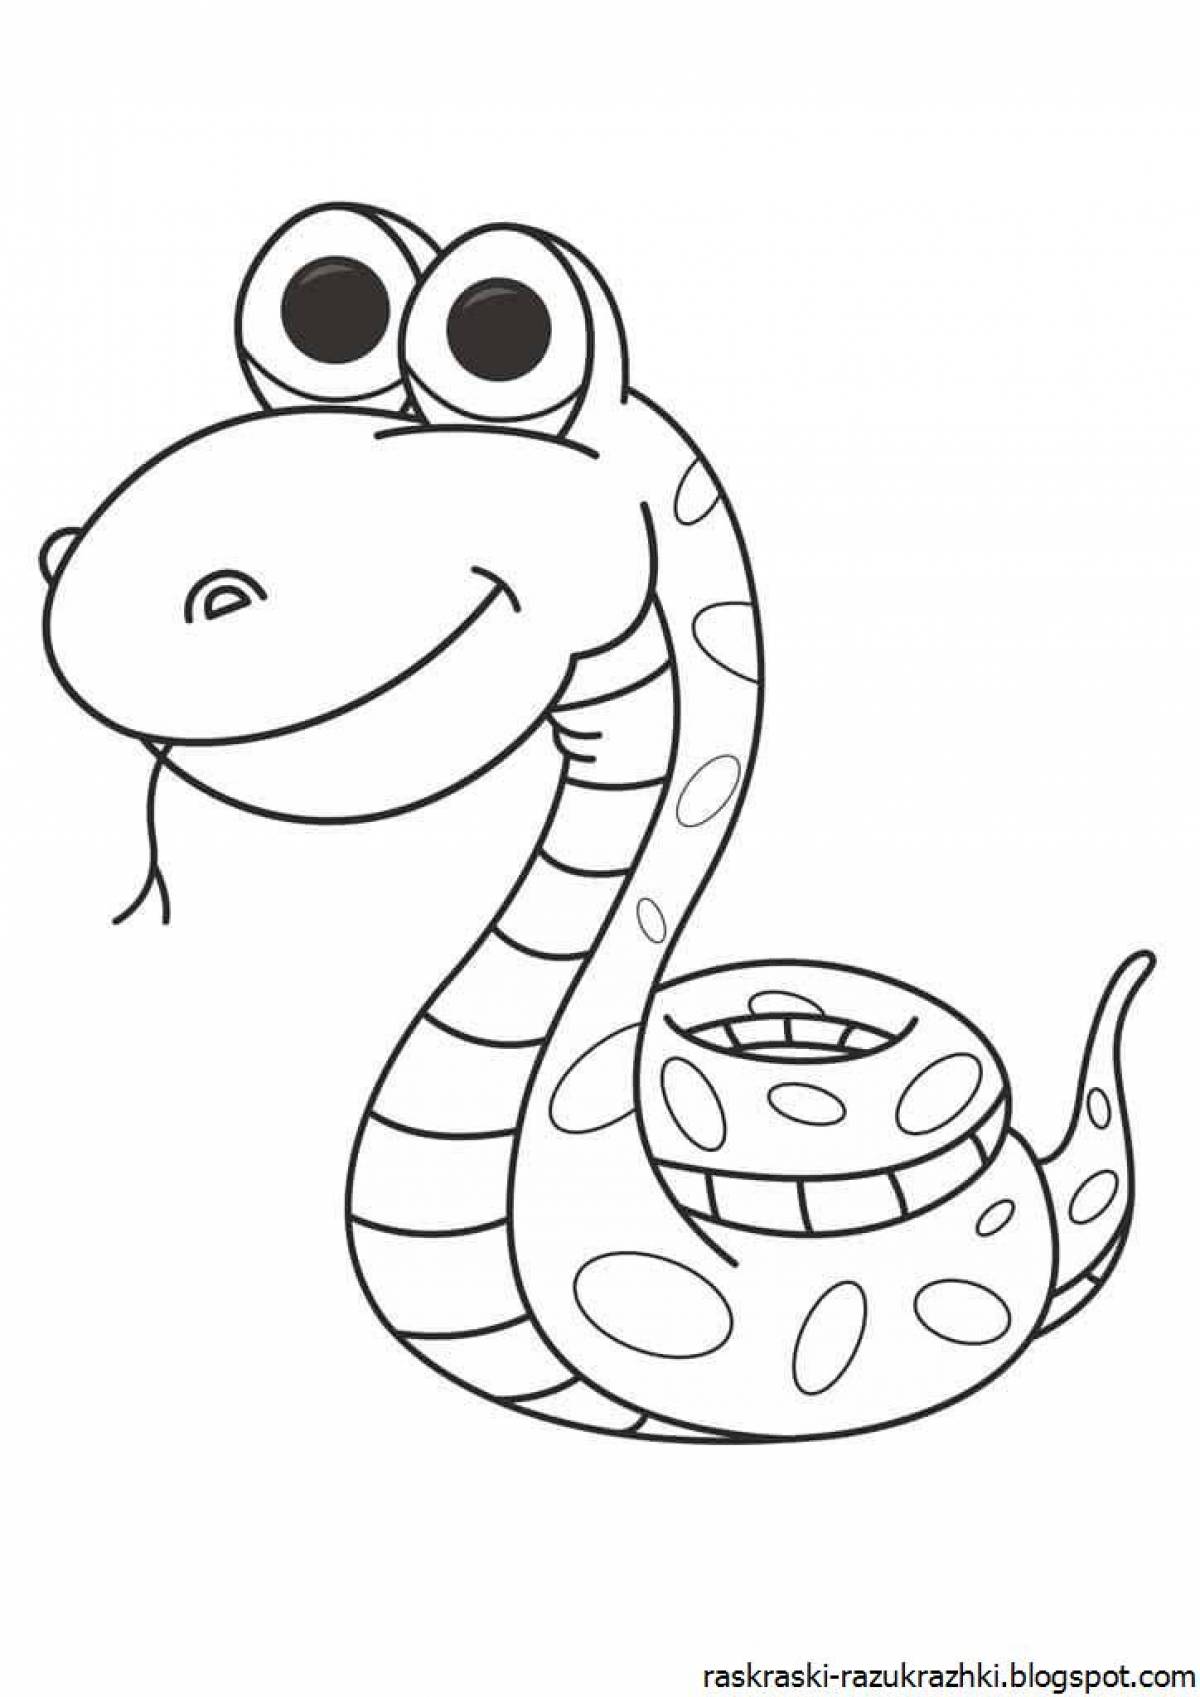 Colorful snake coloring page for kids